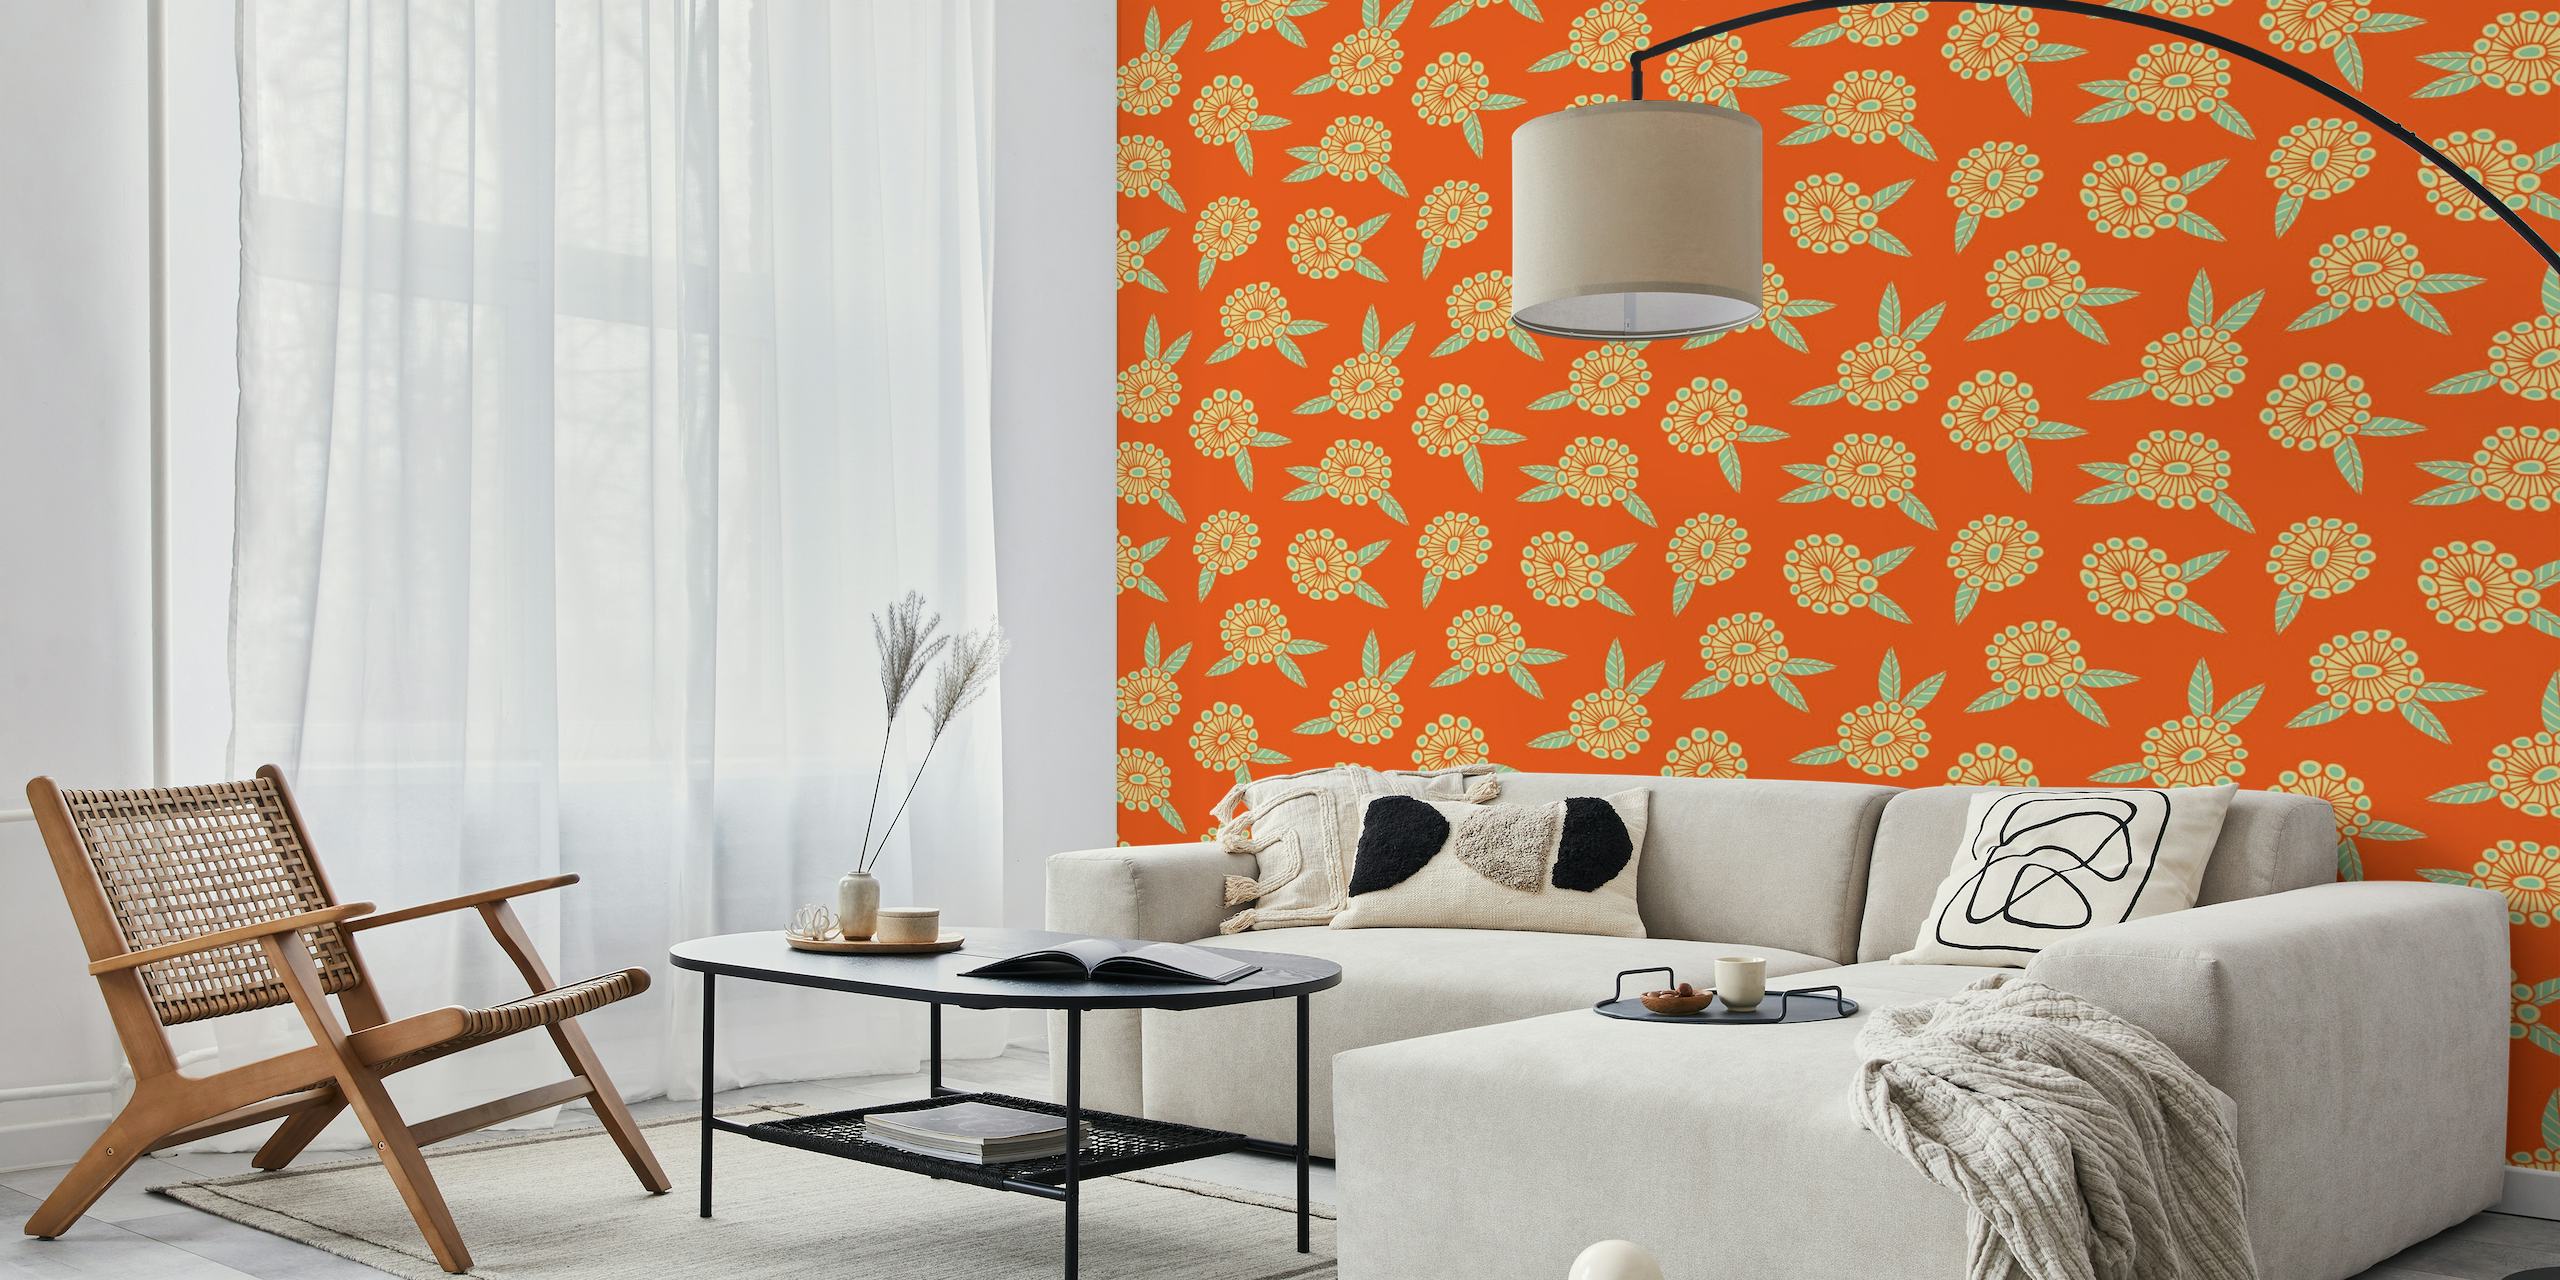 Warm and sunny retro floral pattern on a bright orange background wall mural